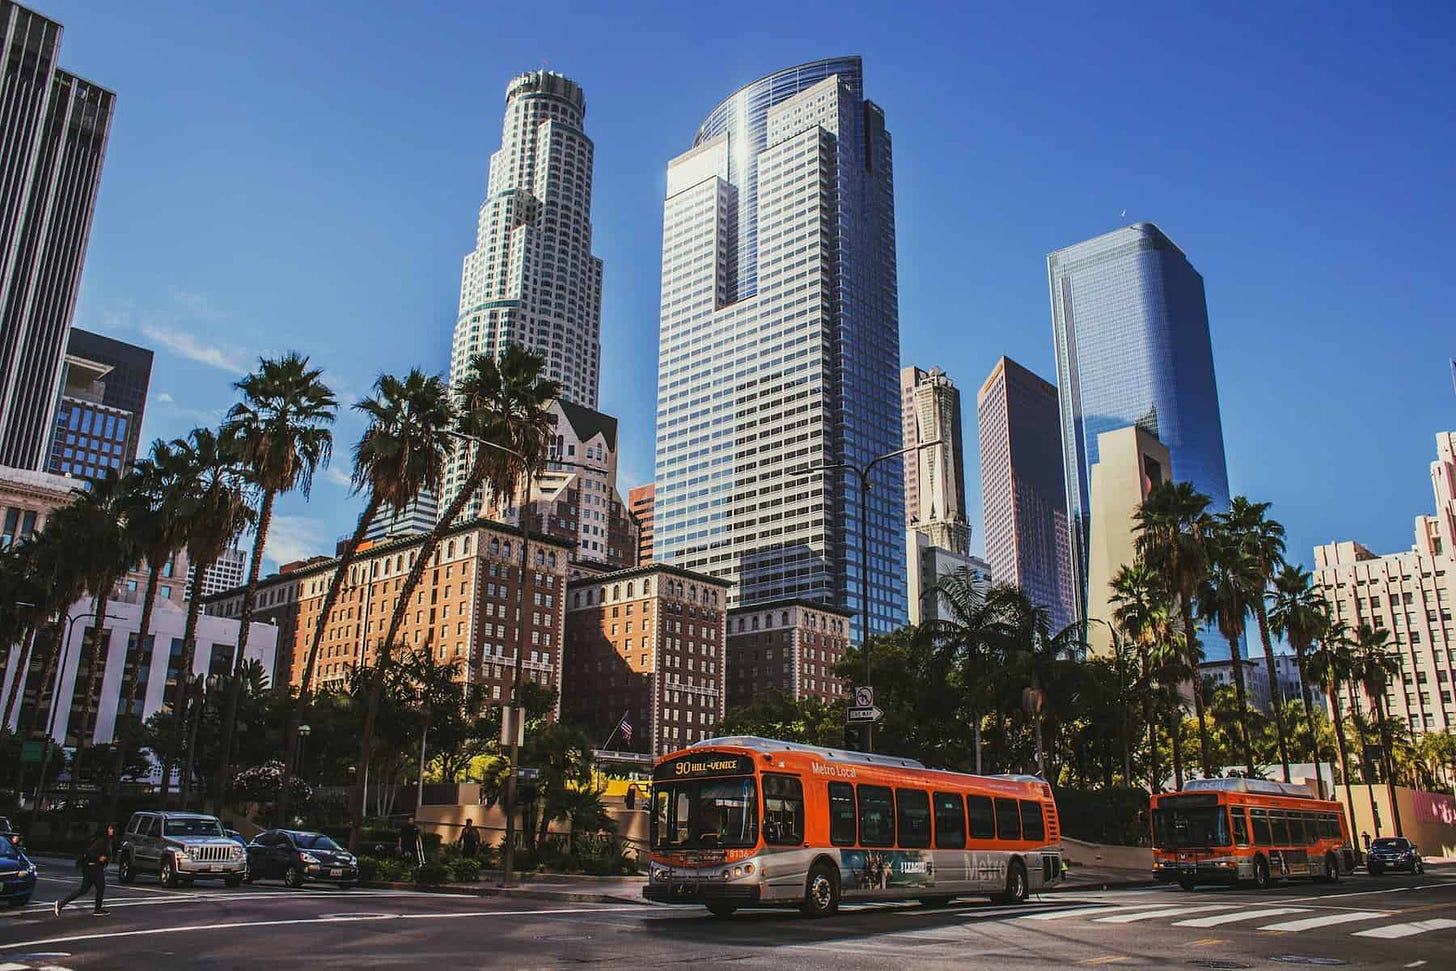 Los Angeles County Implements Plant-Based Food Policy to Tackle Environmental and Health Concerns -